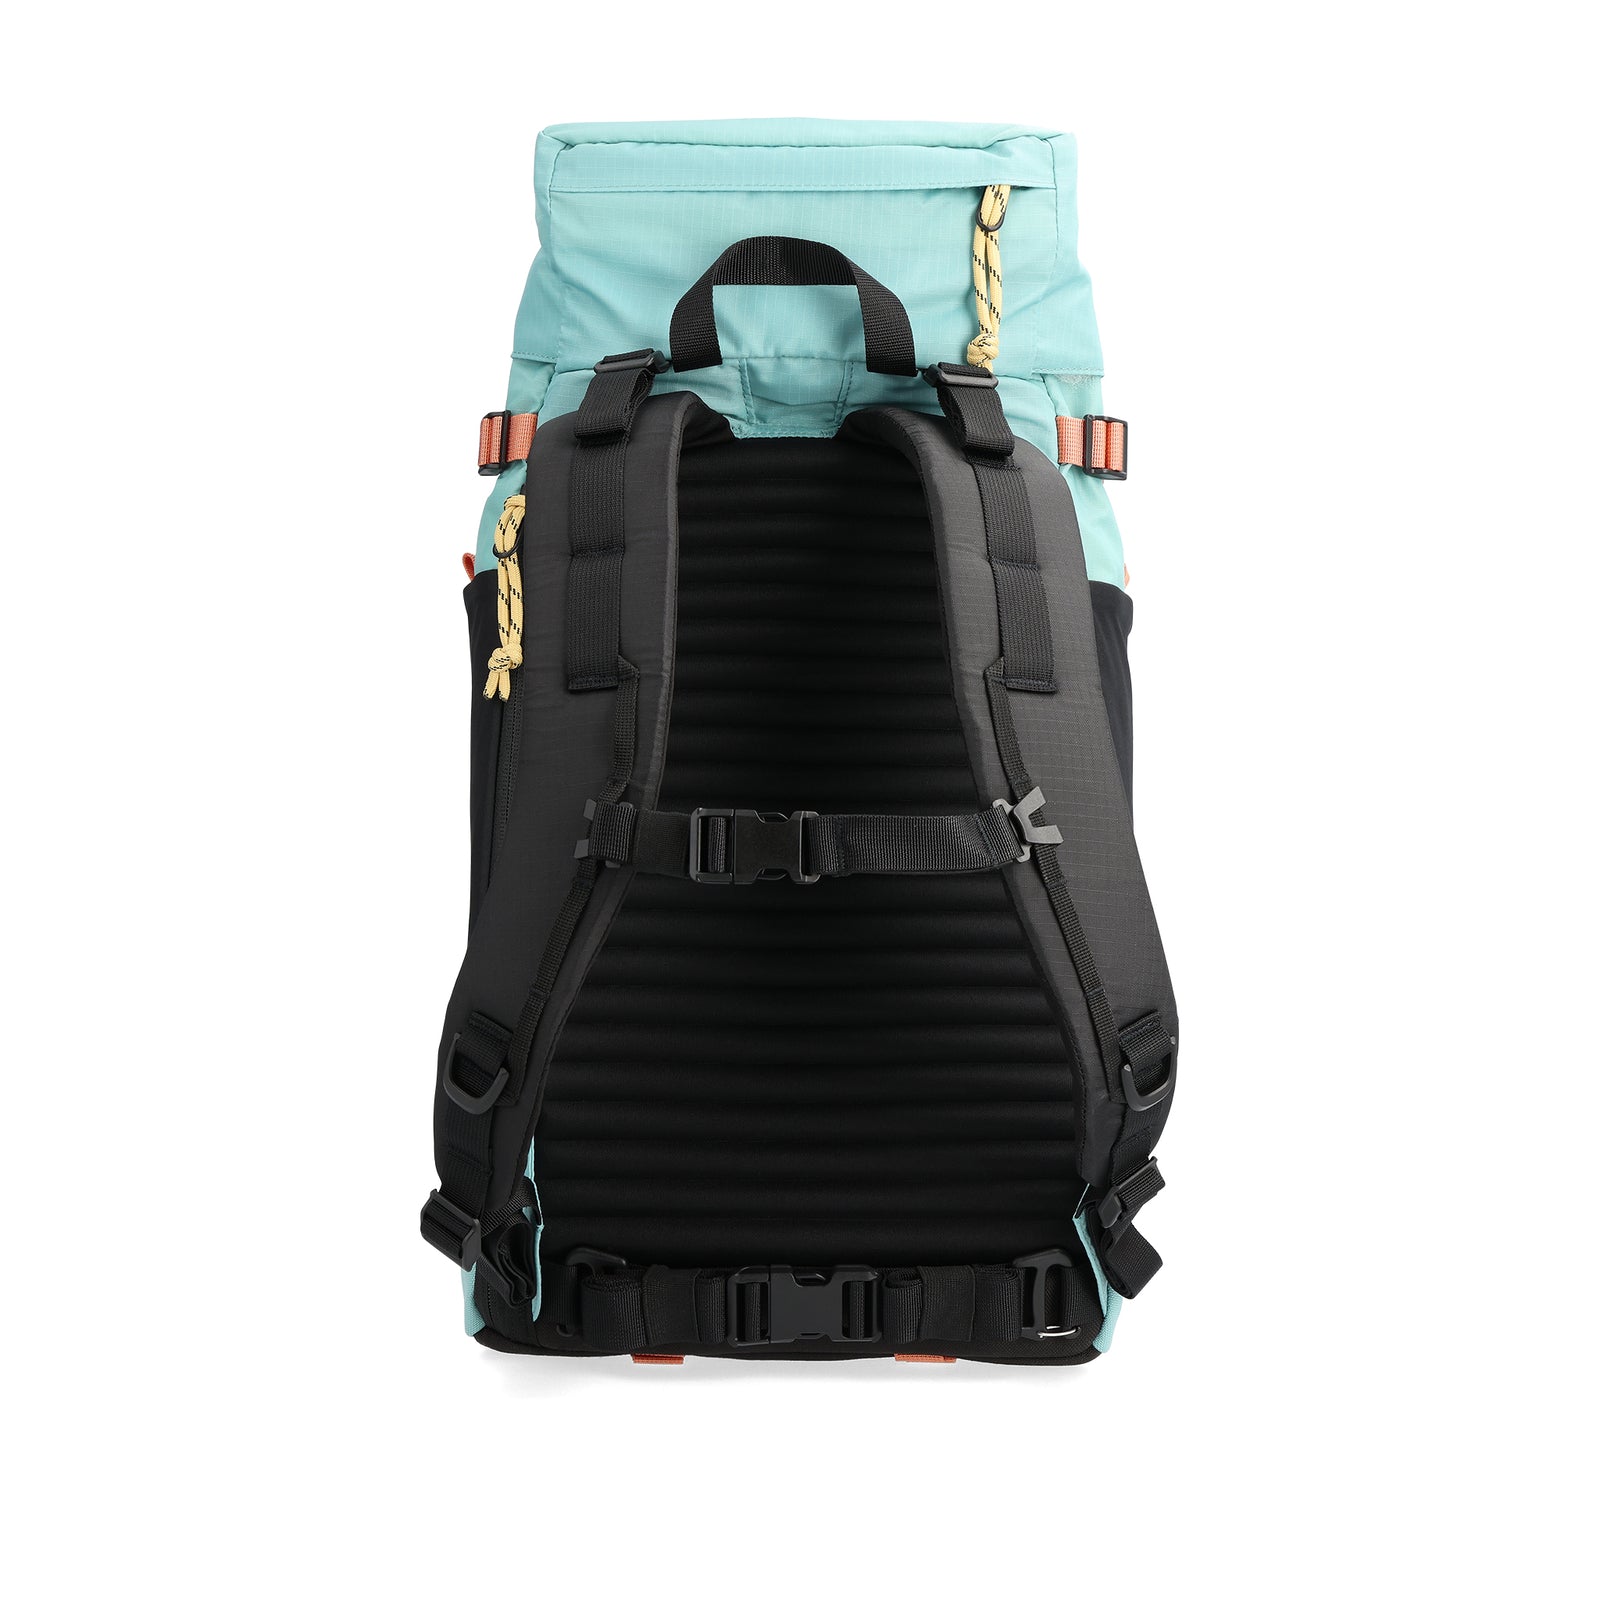 Back View of Topo Designs Mountain Pack 16L 2.0 in "Geode Green / Sea Pine"